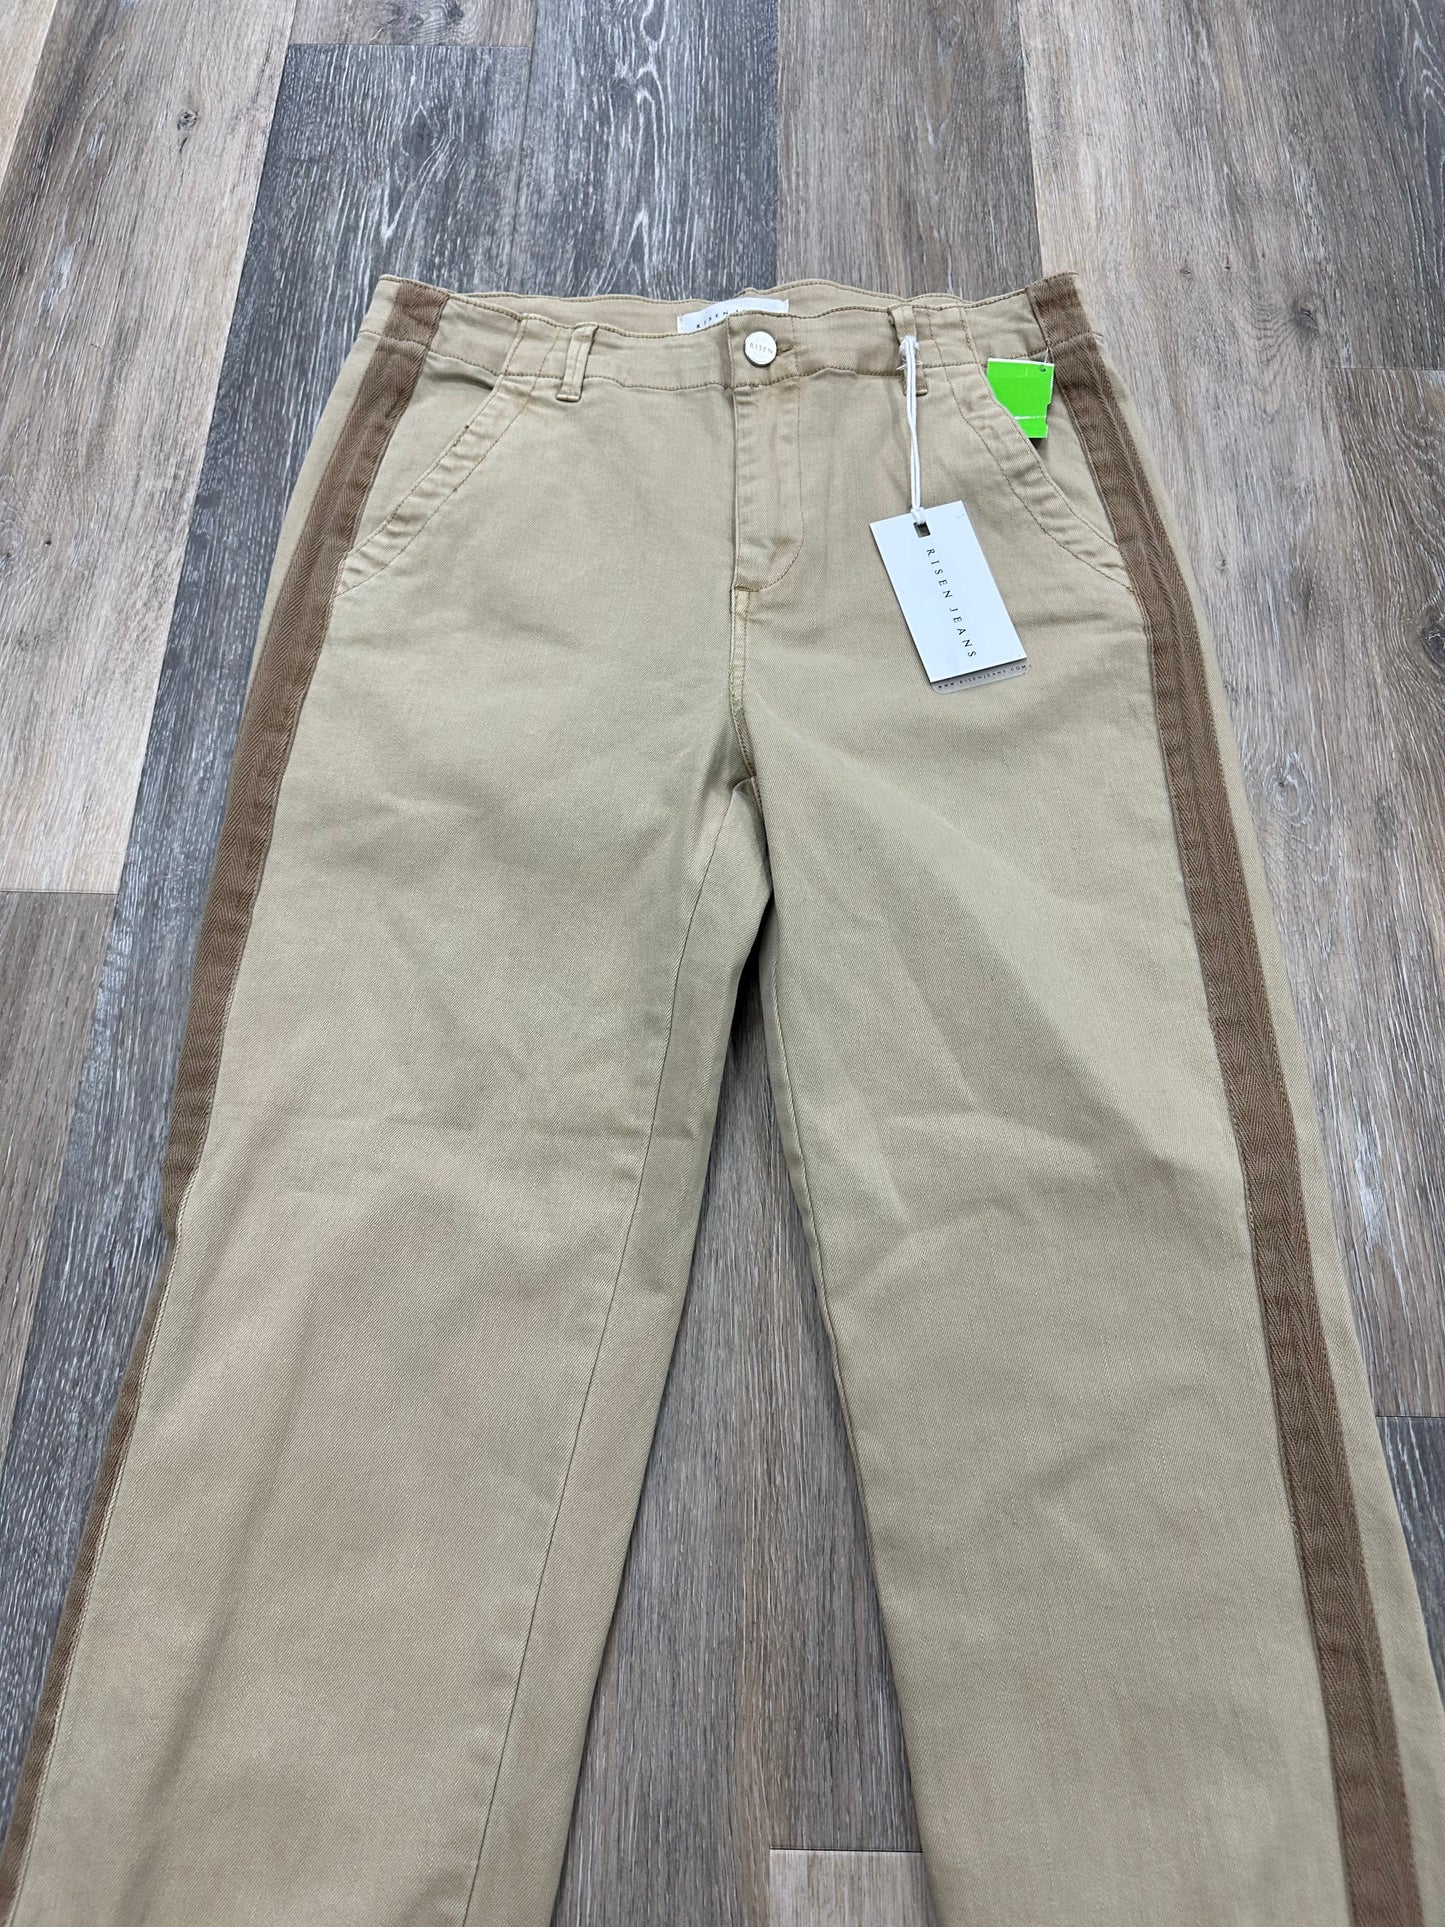 Pants Ankle By Risen  Size: 9